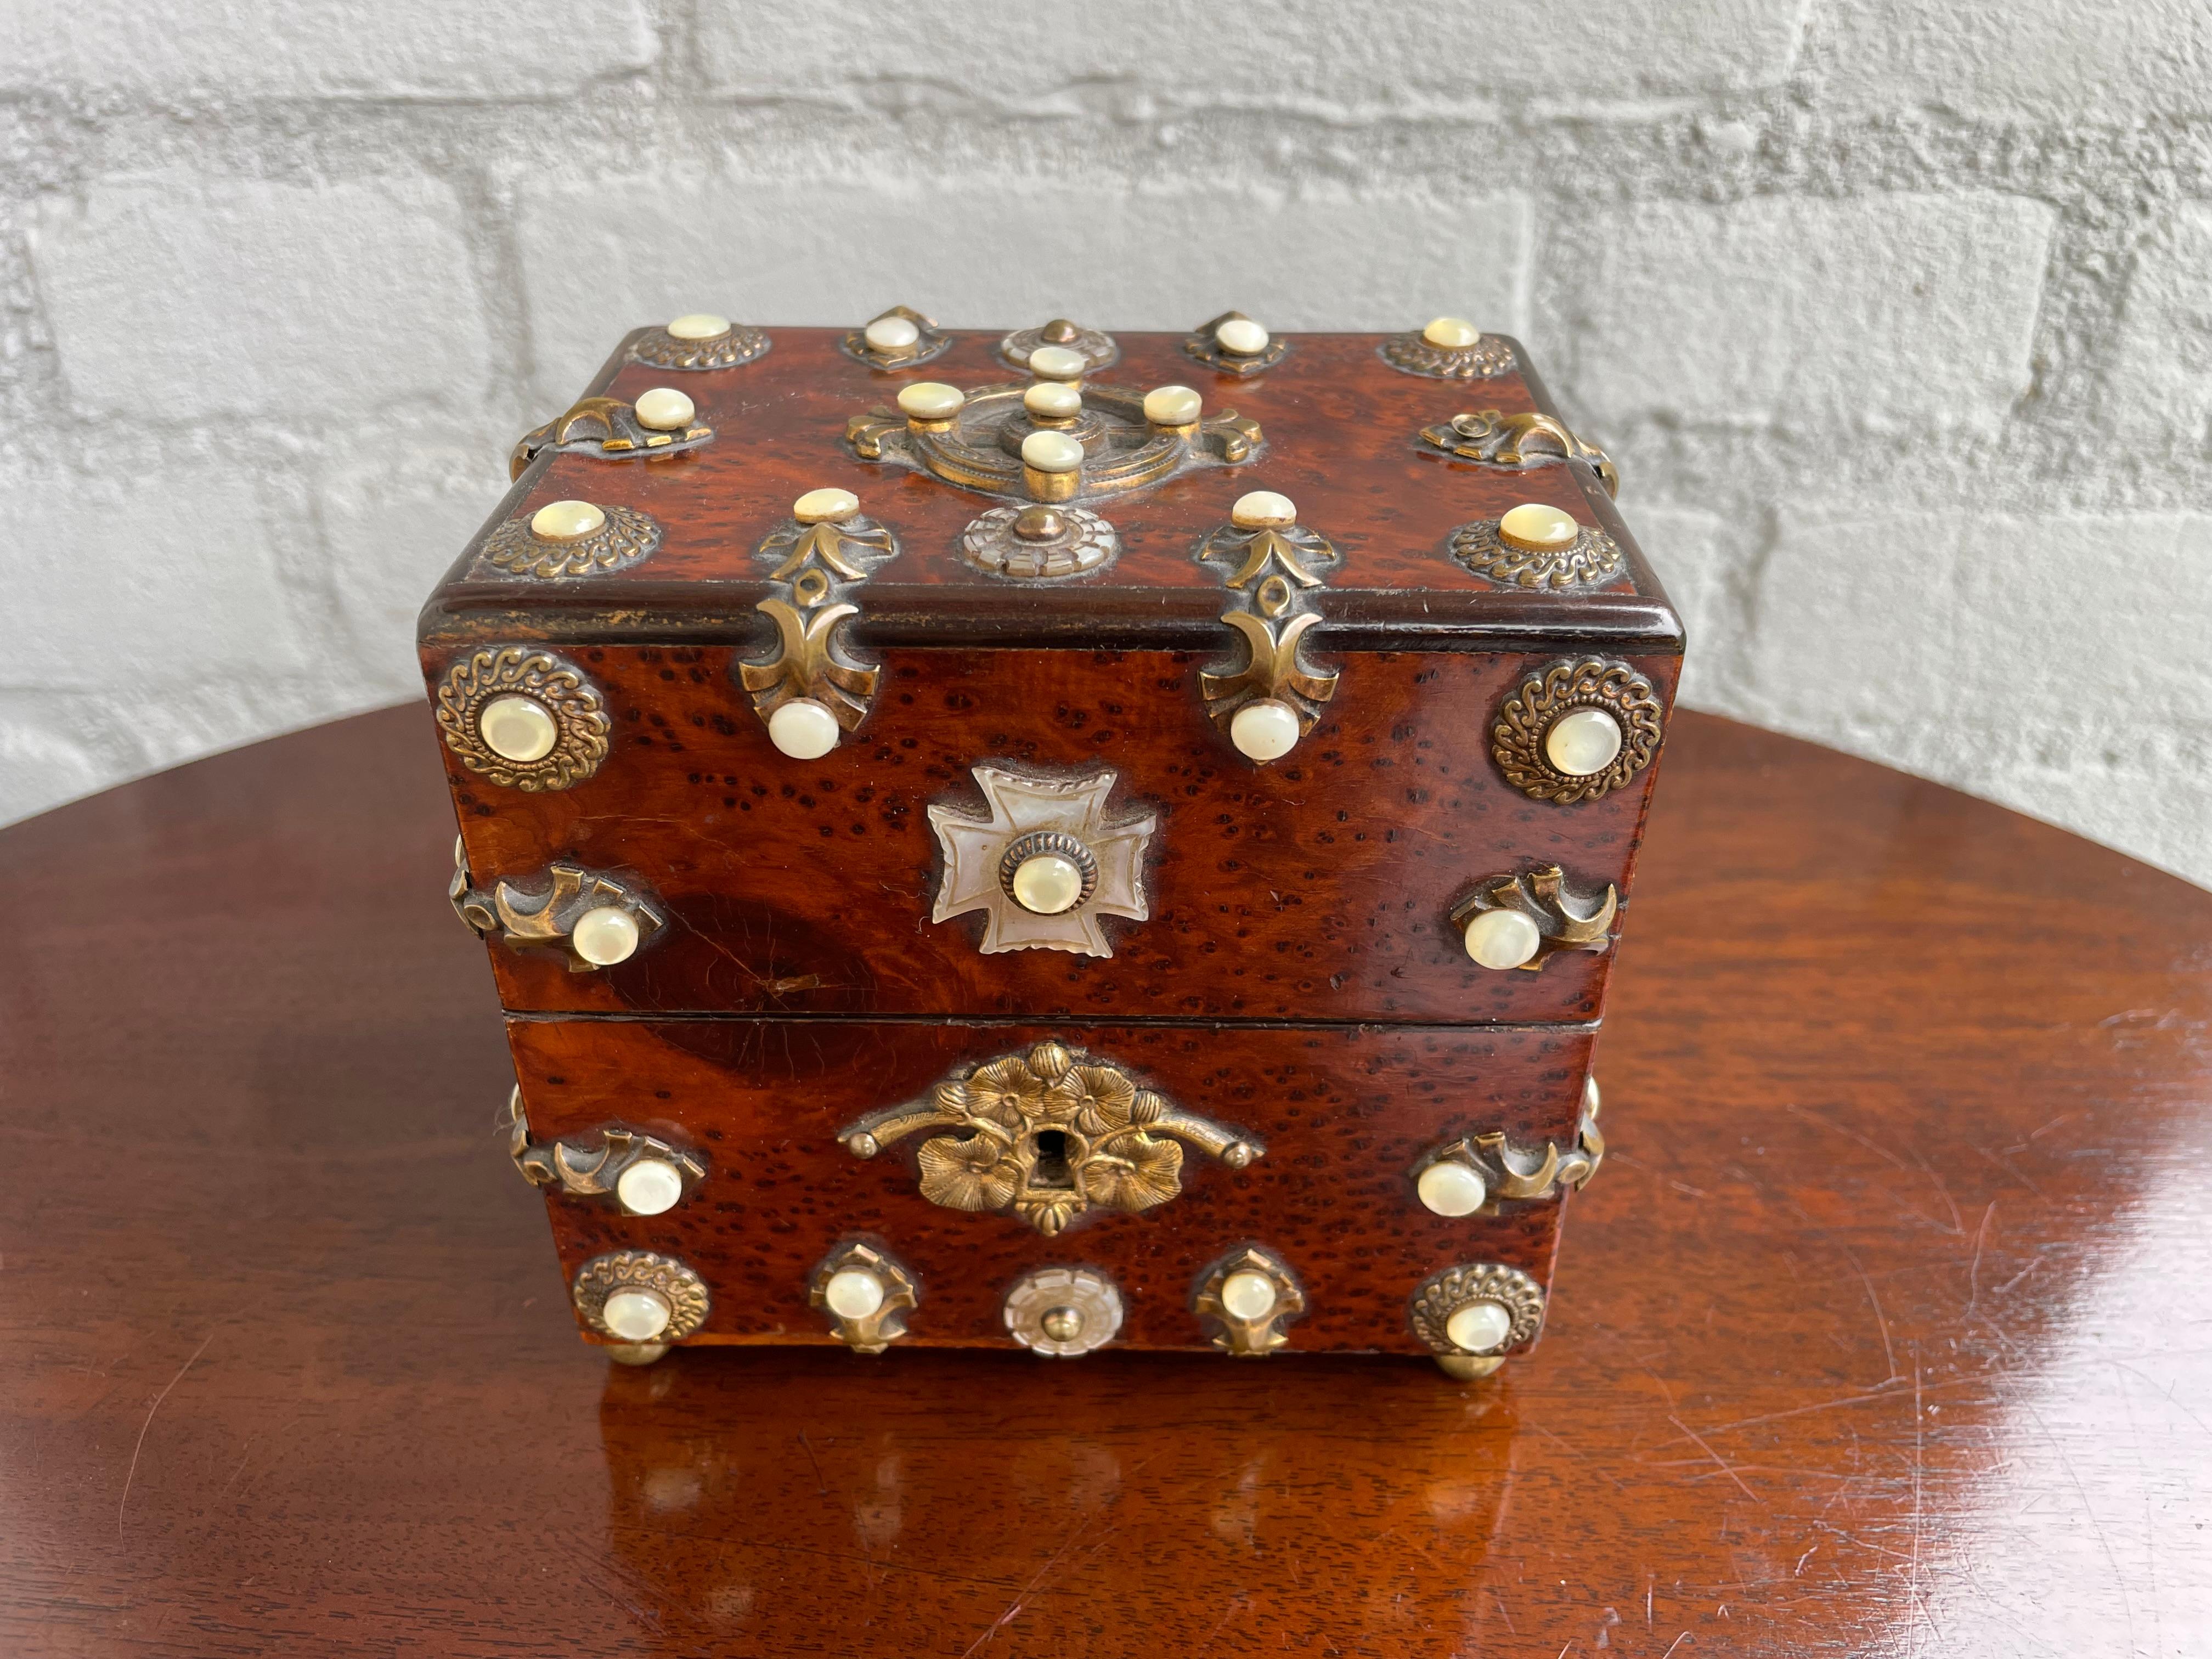 Incredible workmanship and amazingly intricate, antique Napoleon II box, mid 1800s

When it comes to collectible and high value boxes, this little, fit-for-a-king gem from the 1850s is right up there with the rarest and most beautiful we ever saw.